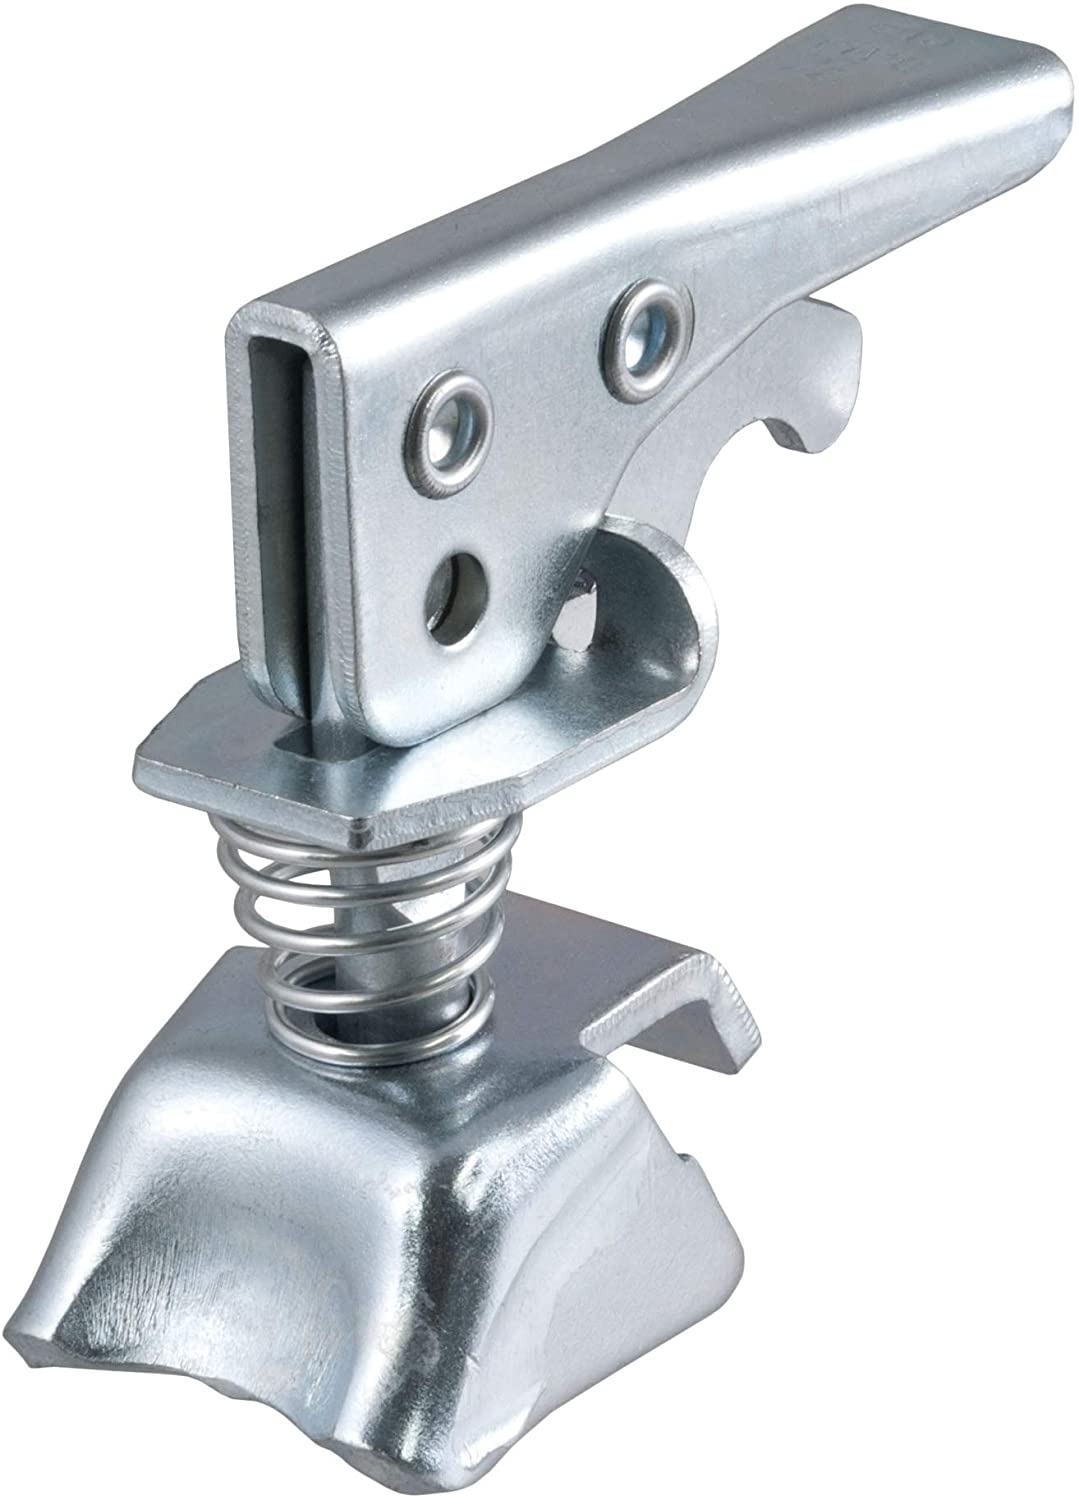 CURT 25194 Posi-Lock Coupler Latch for 2-Inch Trailer Hitch Ball